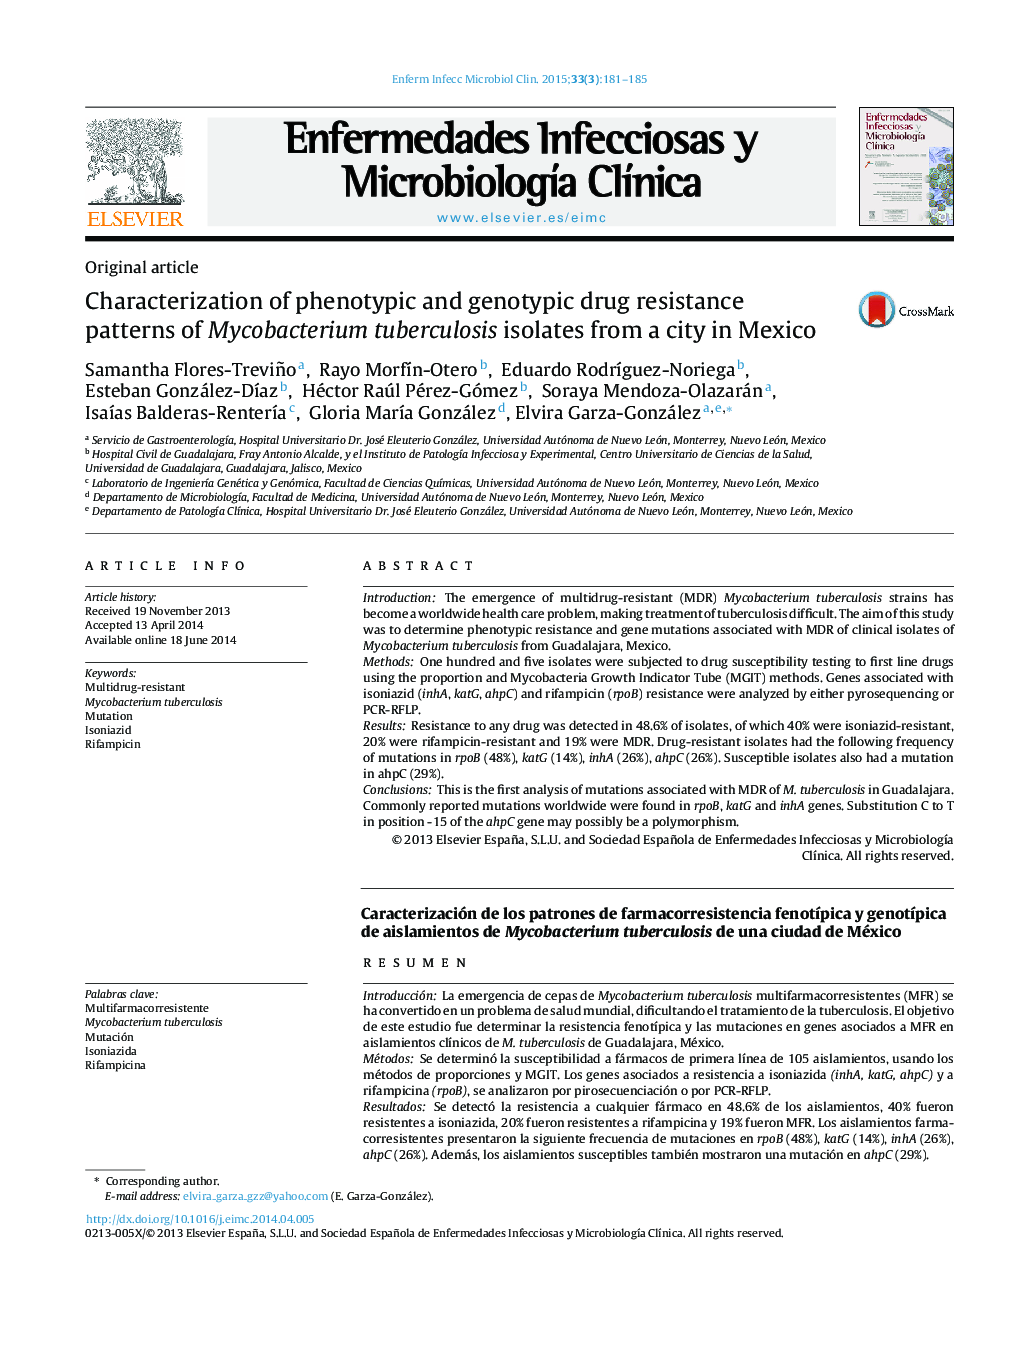 Characterization of phenotypic and genotypic drug resistance patterns of Mycobacterium tuberculosis isolates from a city in Mexico